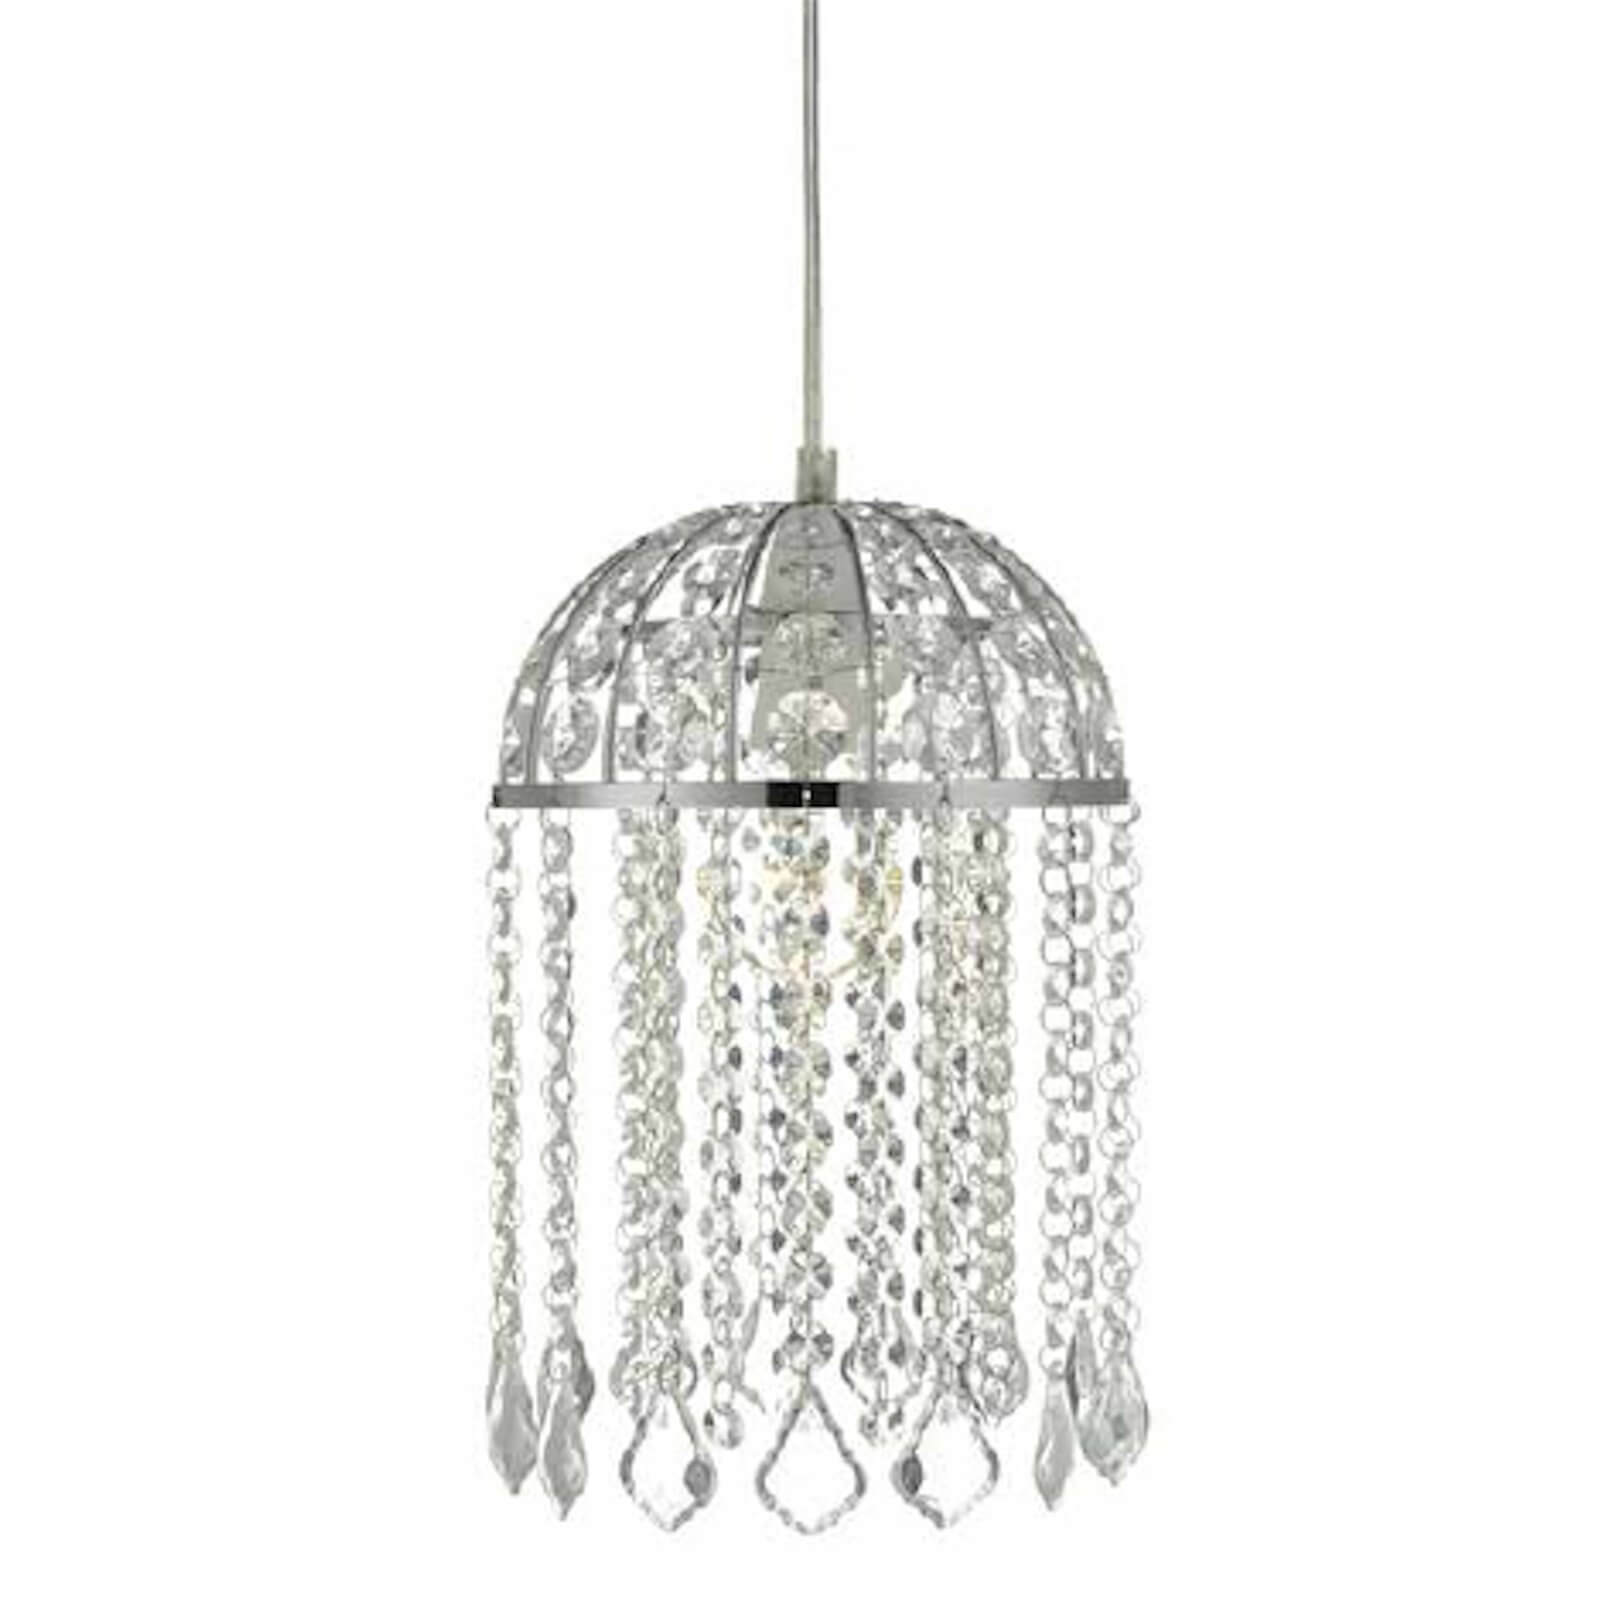 Victoria Domed Crystal Easy Fit Lamp Shade